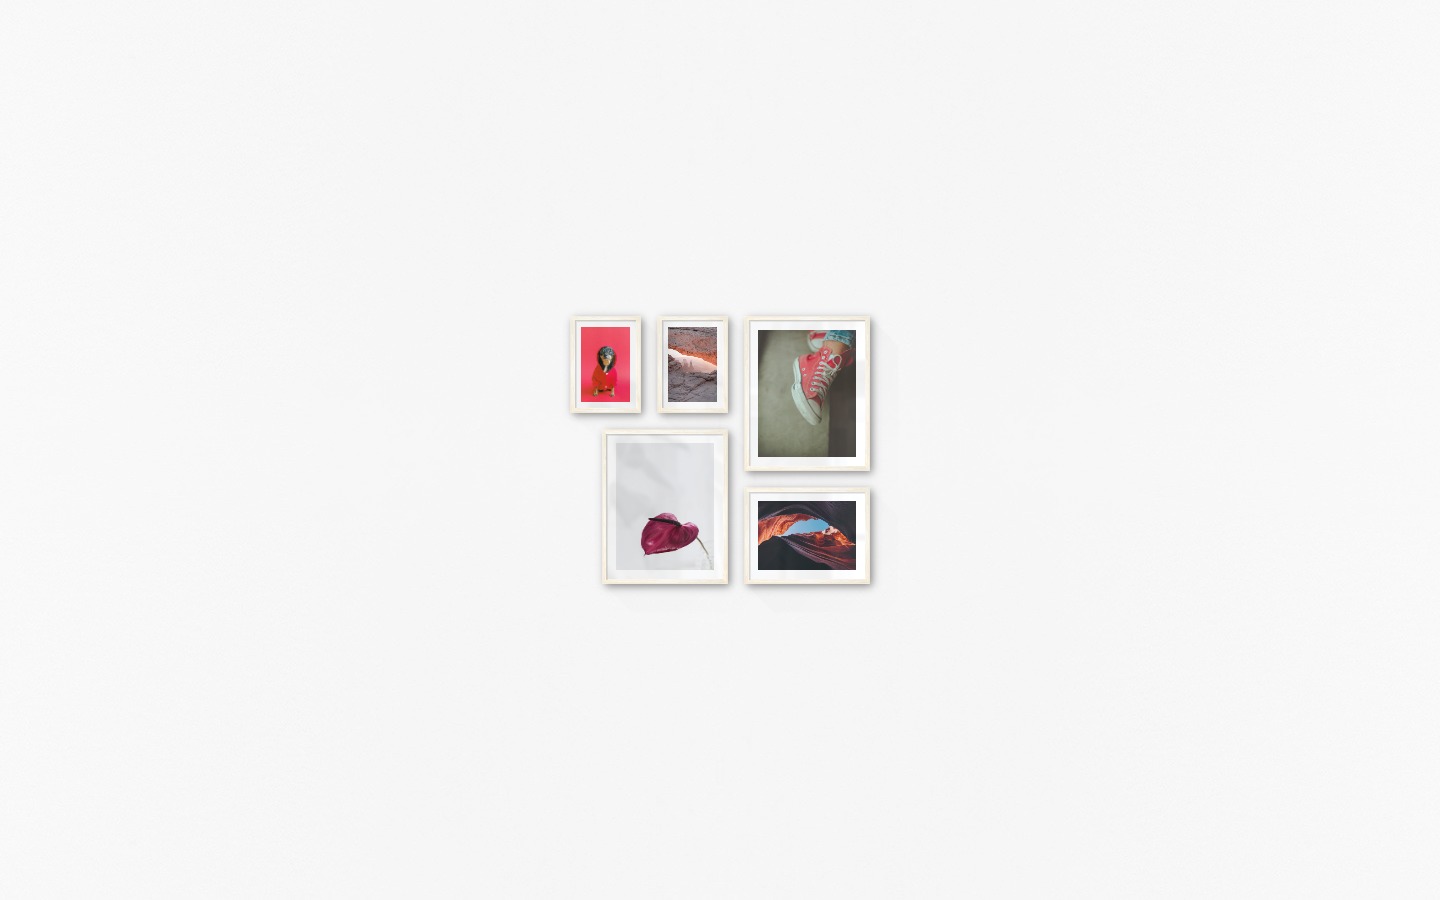 Gallery wall with picture frames in light wood in sizes 21x30, 40x50 and 30x40 with prints "View between cliffs", "Dog in red sweater", "Red flower", "Red shoes" and "Red rock formations"